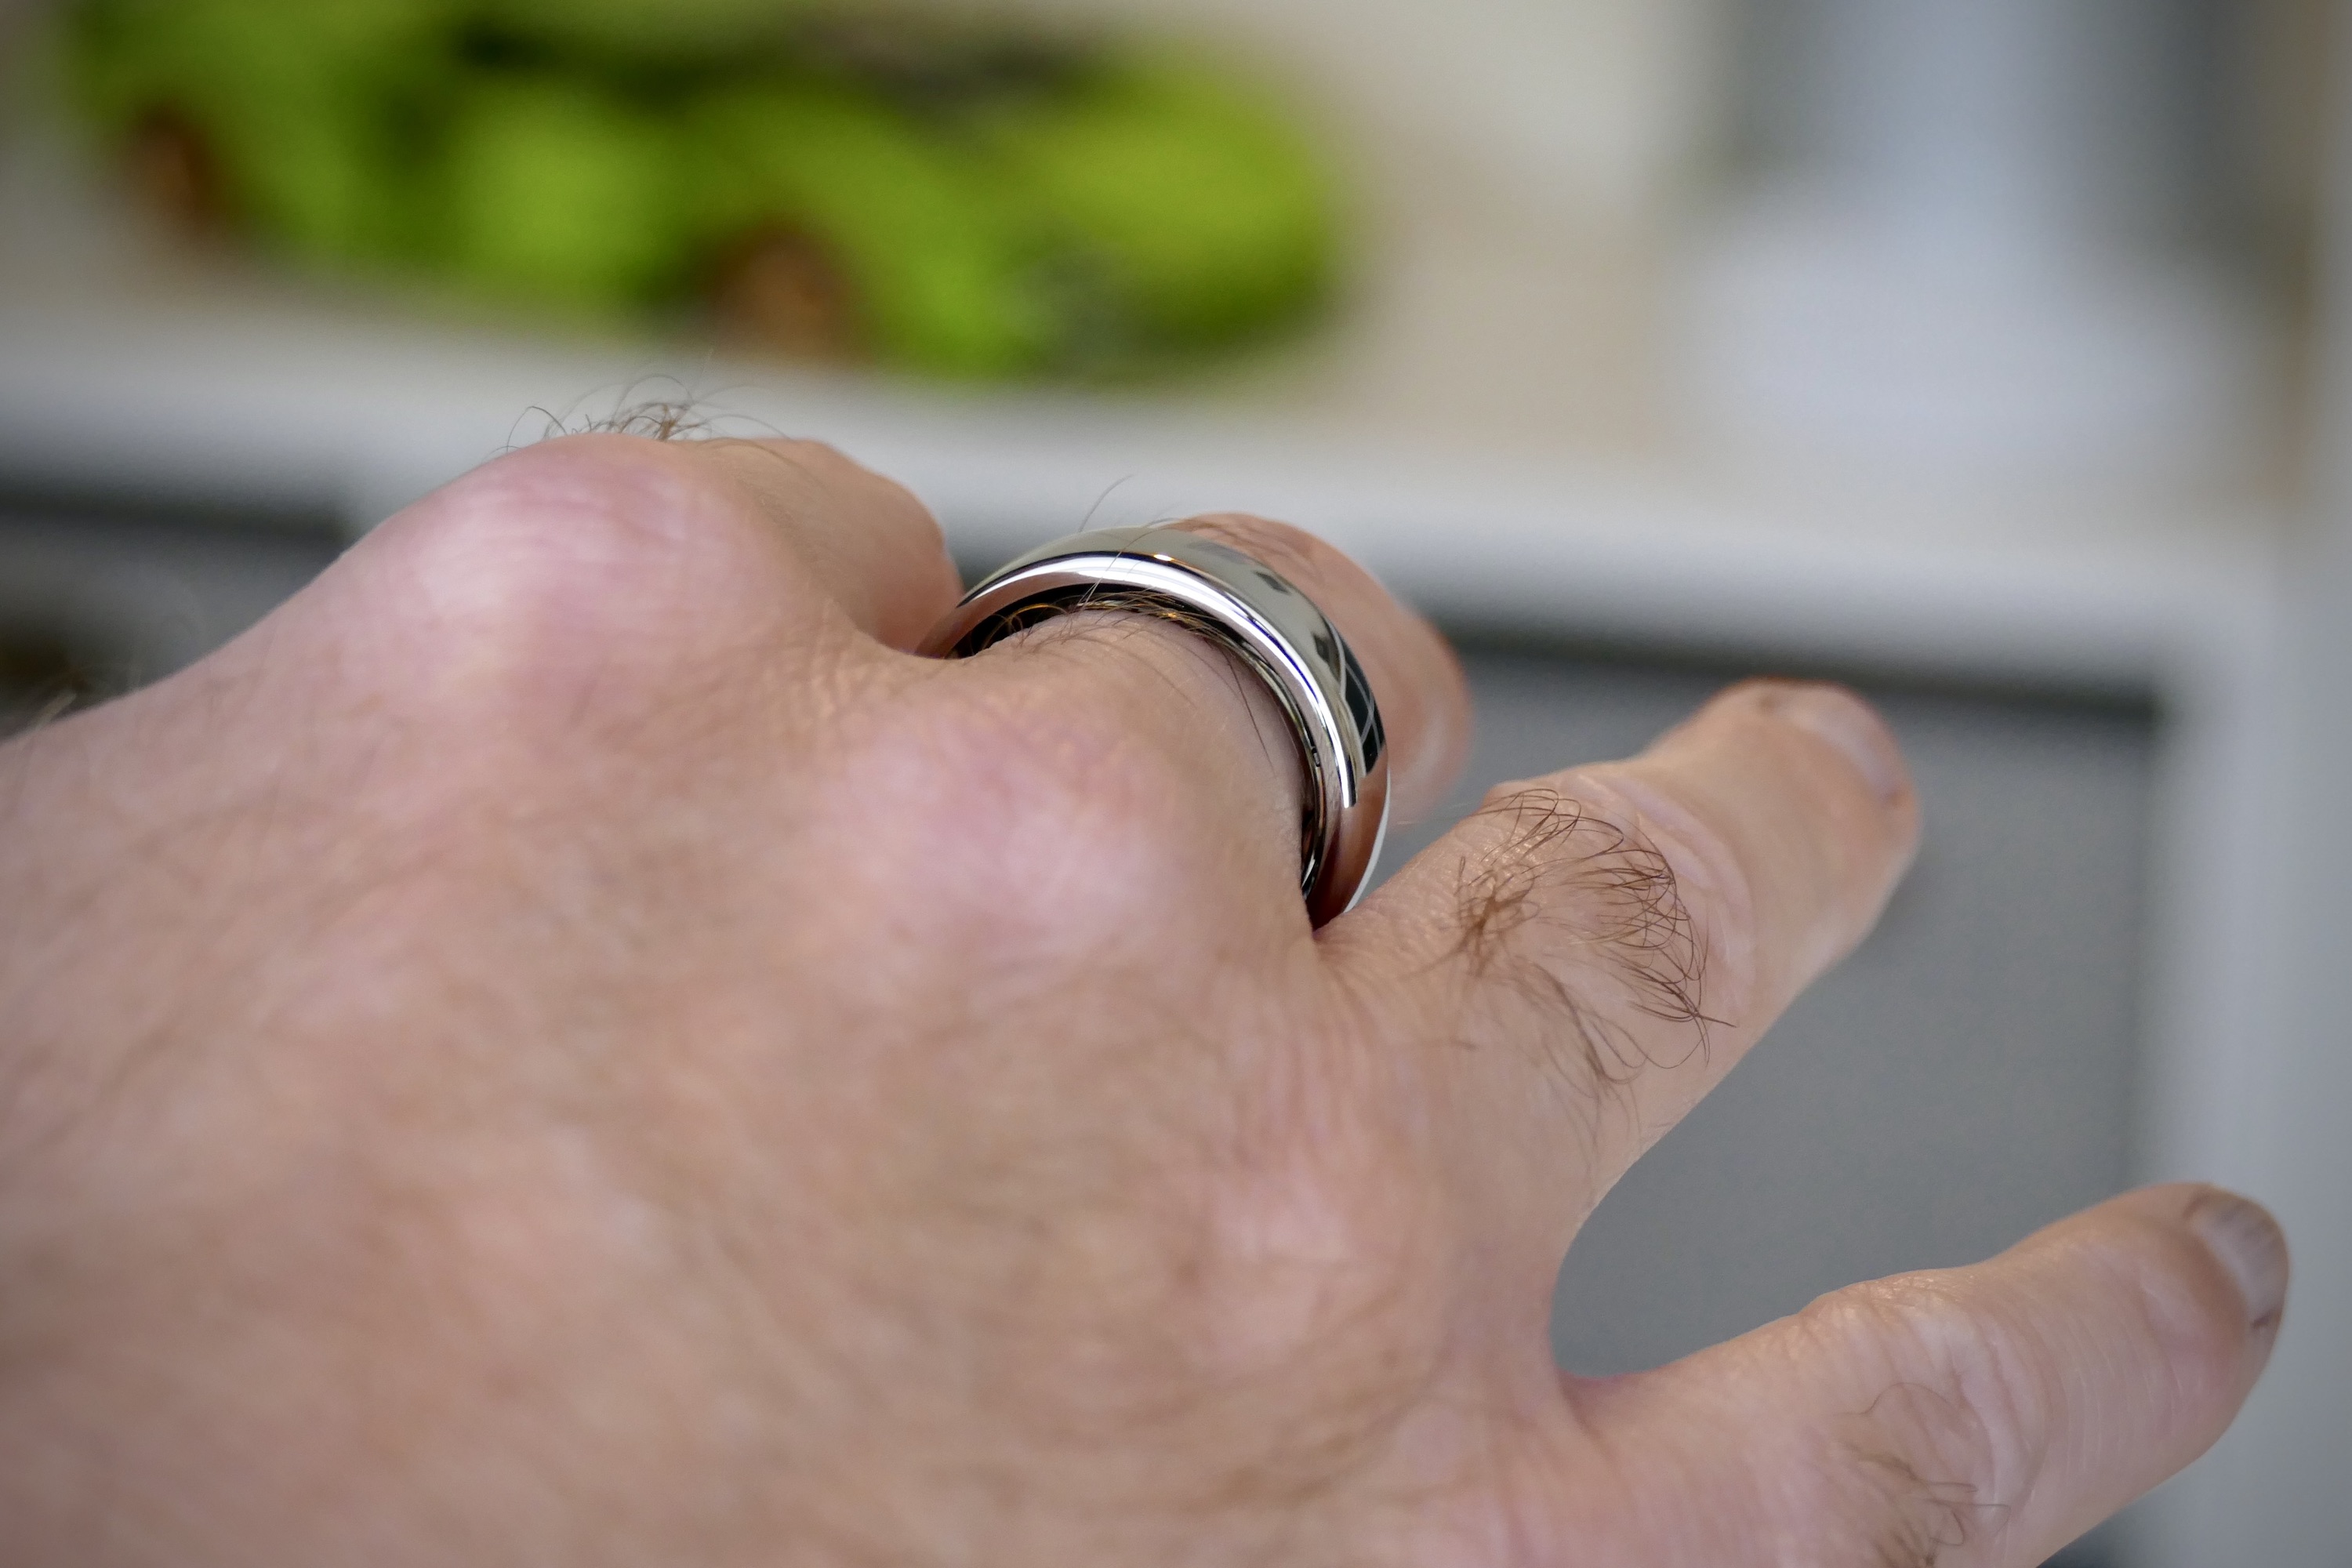 The shape of the Oura Ring Horizon on a finger.